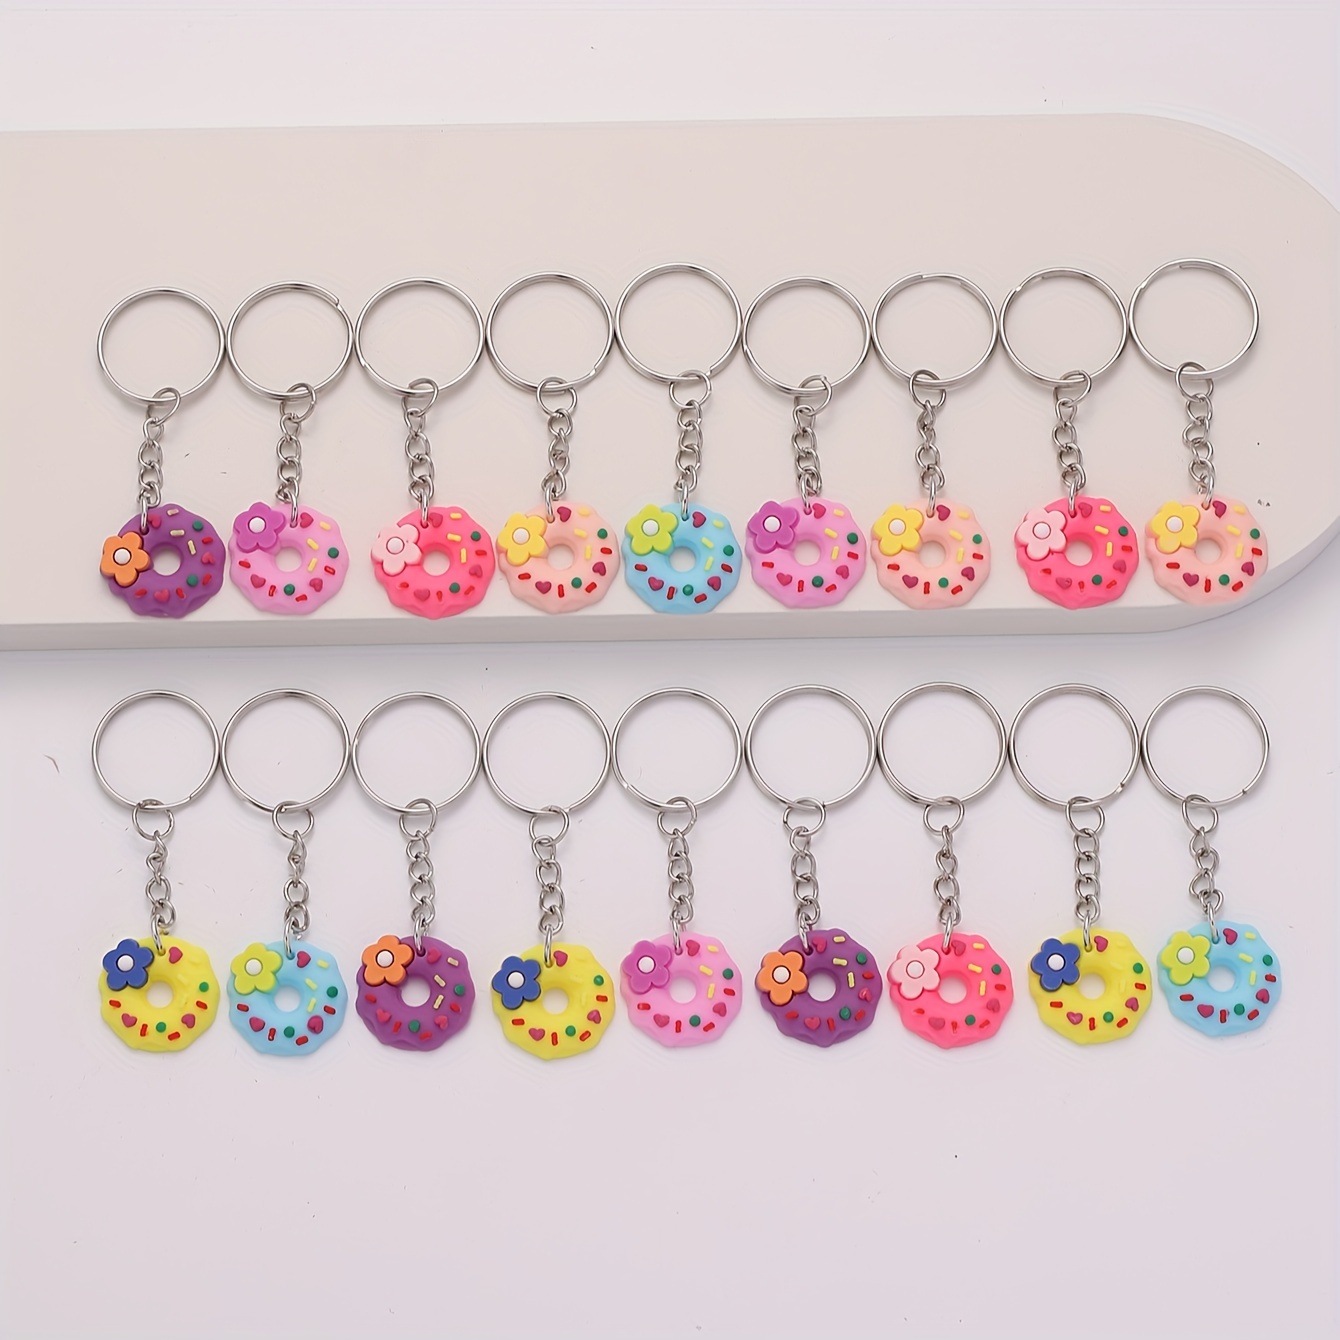 

18-piece Cute Cartoon Donut Keychain Set - Pvc, Colorful Bag Charms & Party Favors For Women